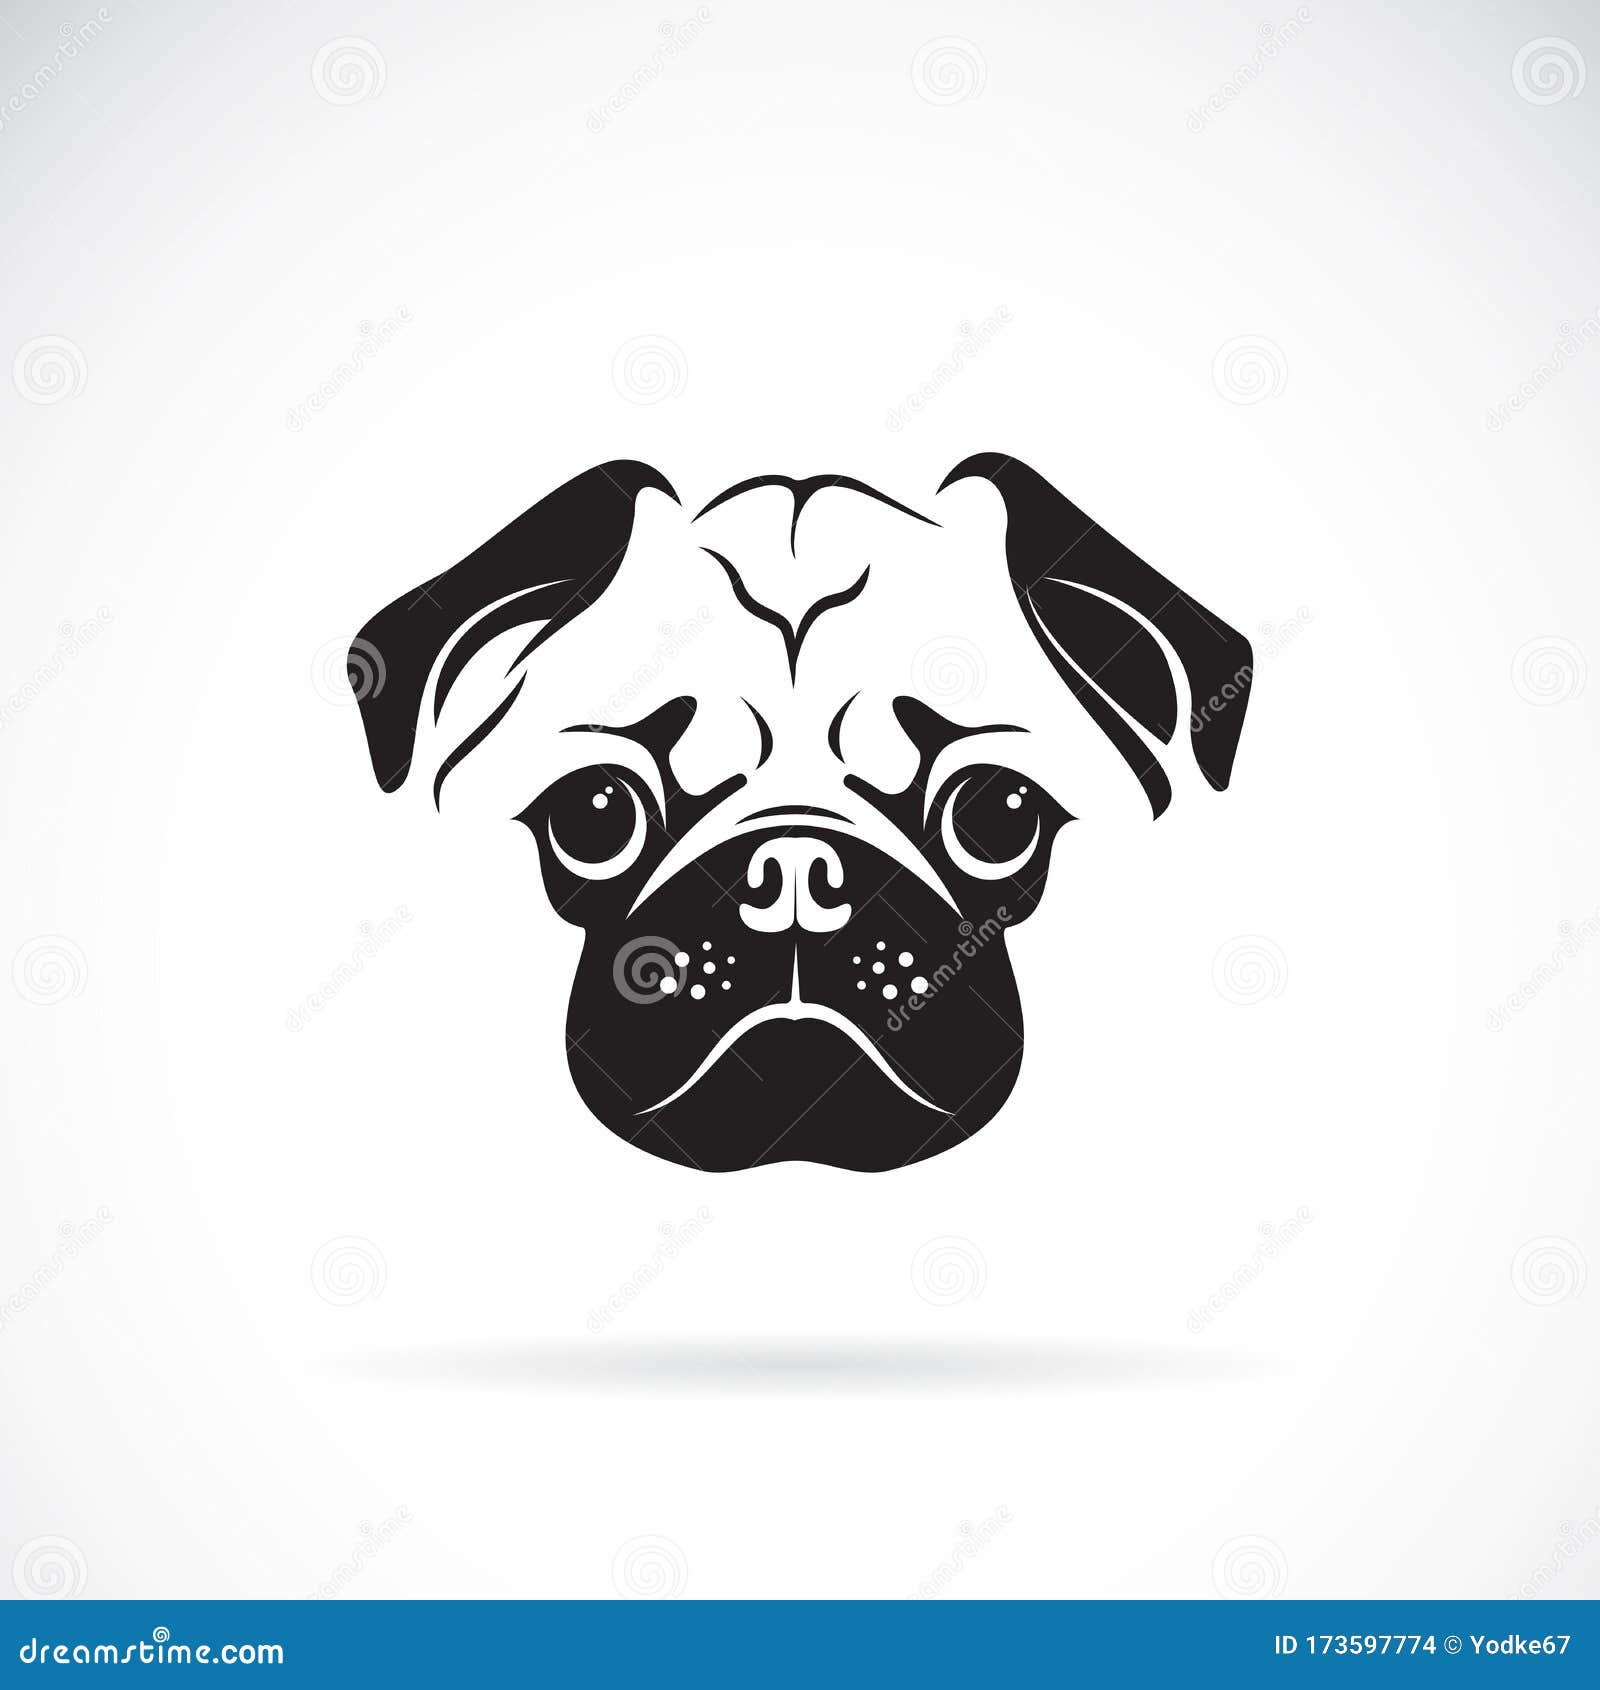 Download Vector Of Pug Dog Face On White Background, Pet. Animals ...